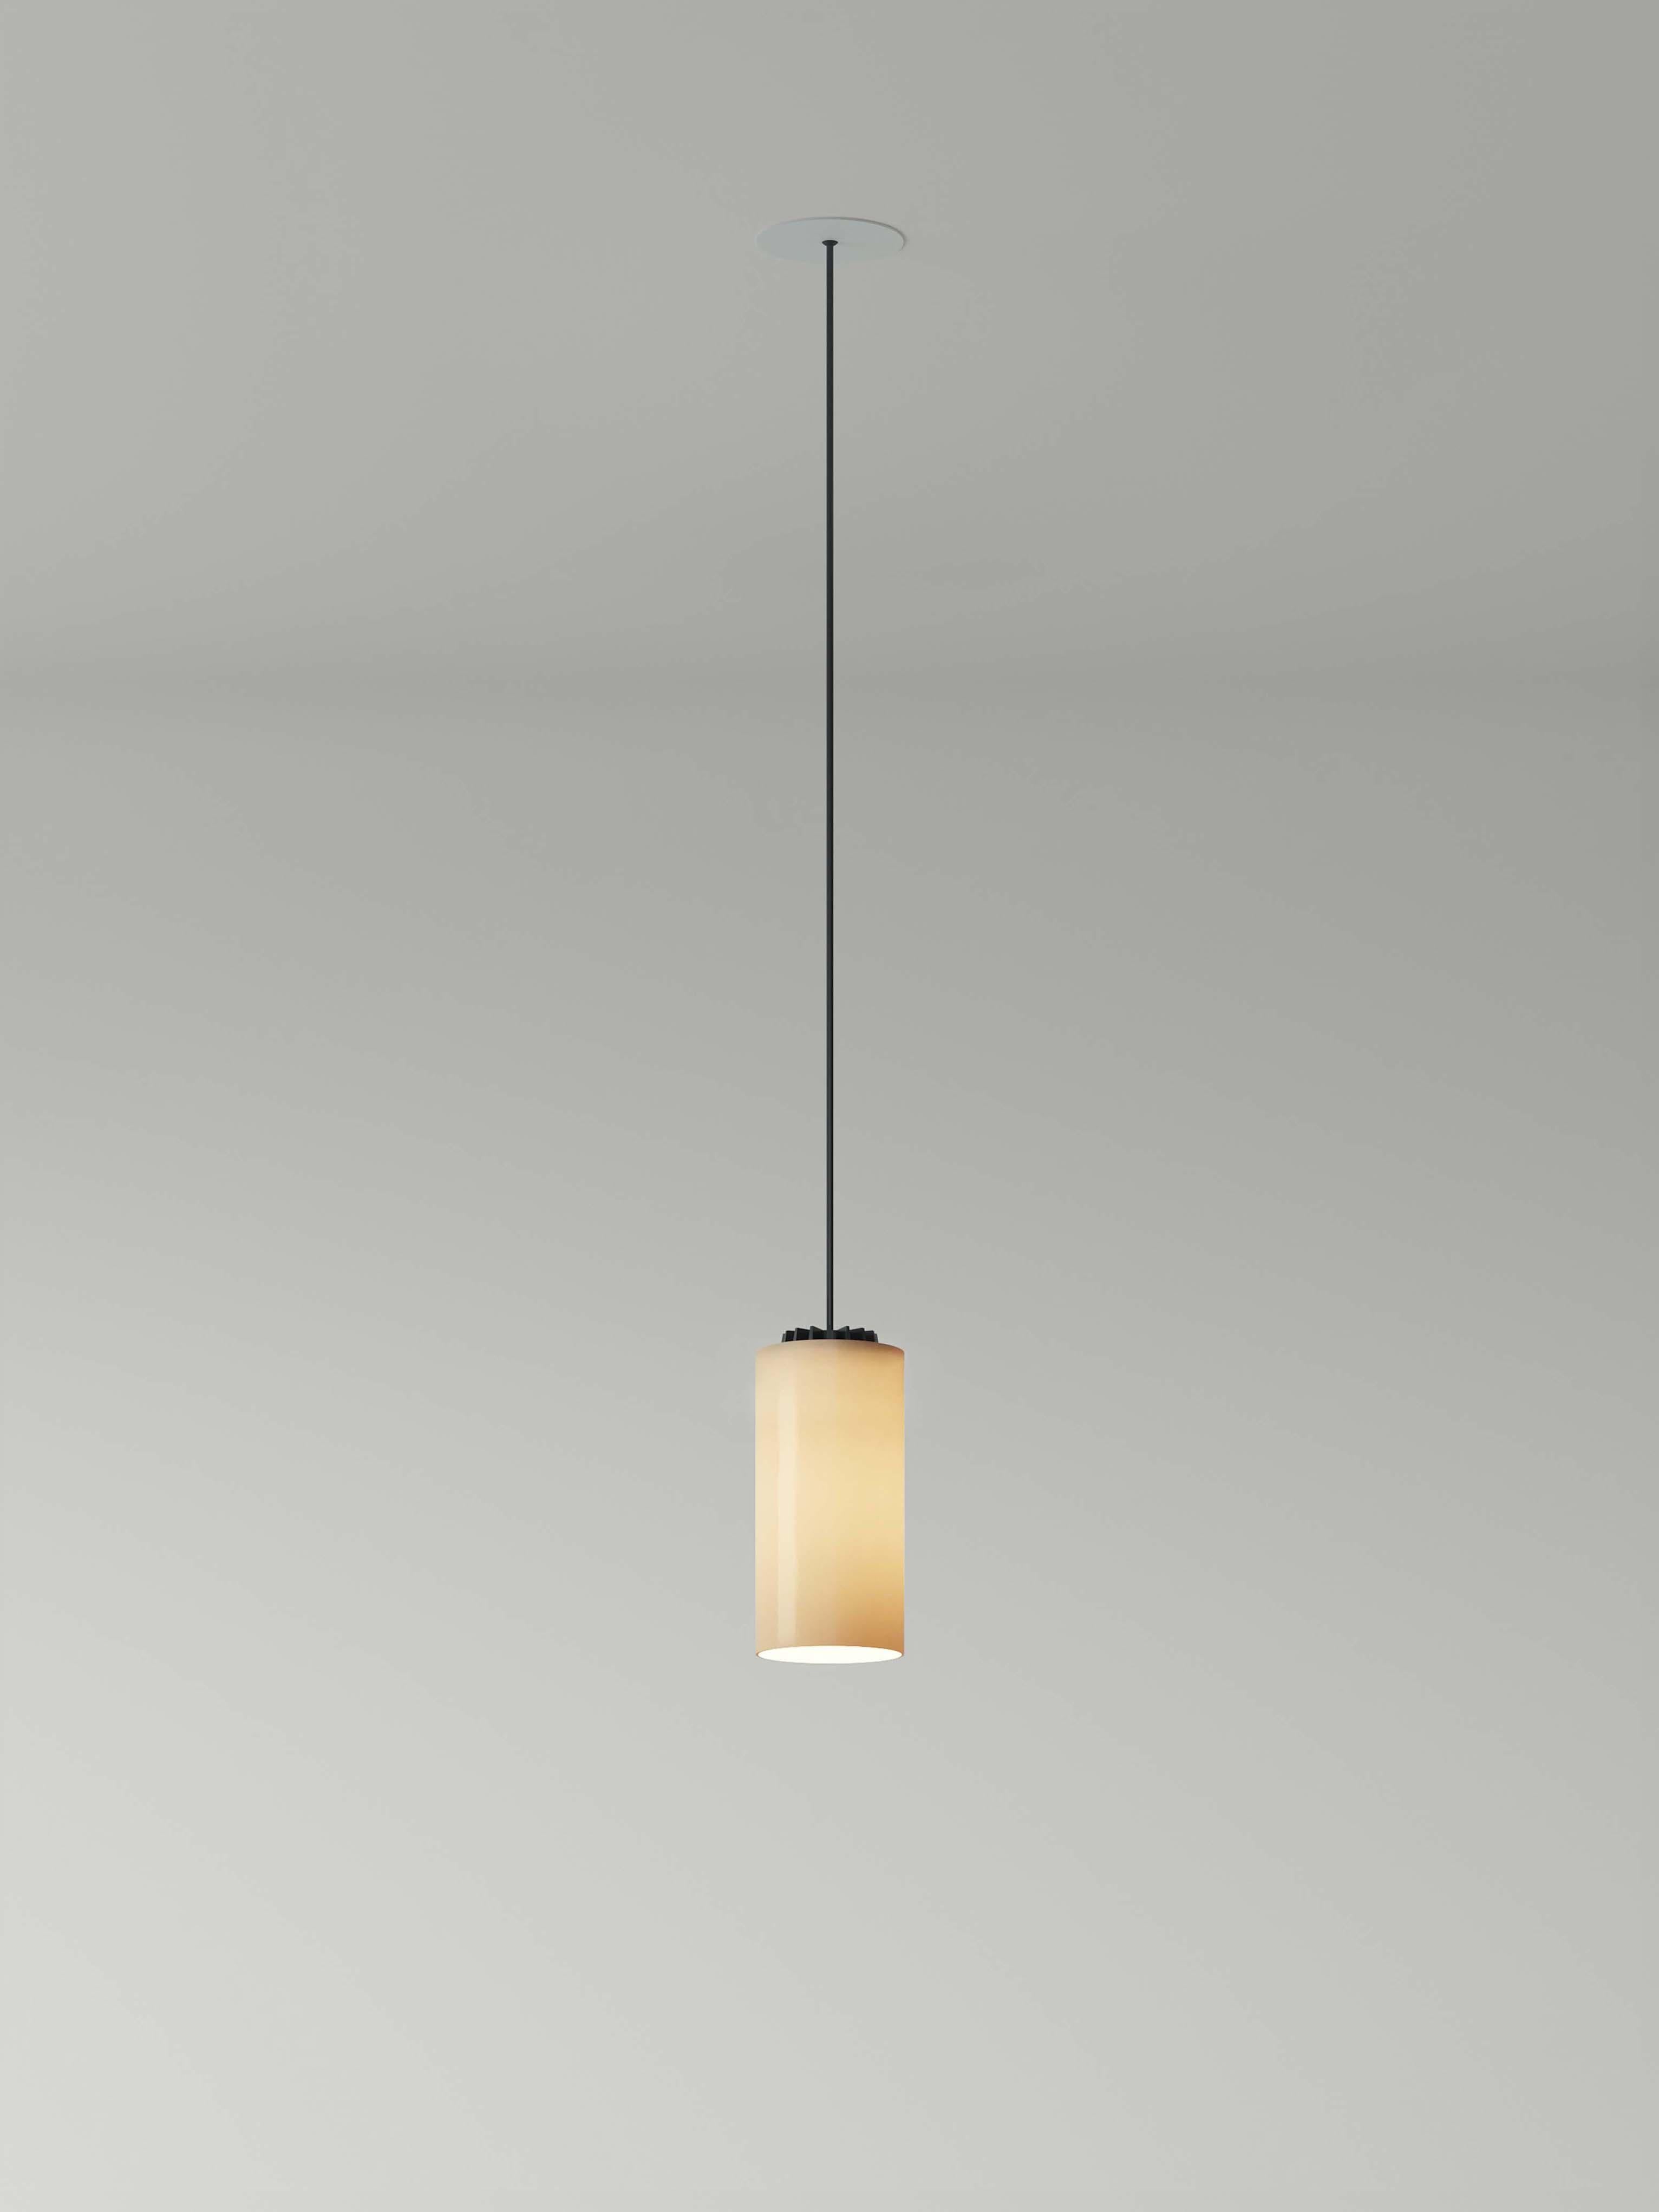 Porcelain Cirio simple pendant lamp by Antoni Arola
Dimensions: D 10 x H 325 cm
Materials: Porcelain.
Available in 3 lampshade materials: white porcelain, white opal glass and polished brass.
Available in 2 cable lengths: 3mts, 8mts.
Availalble